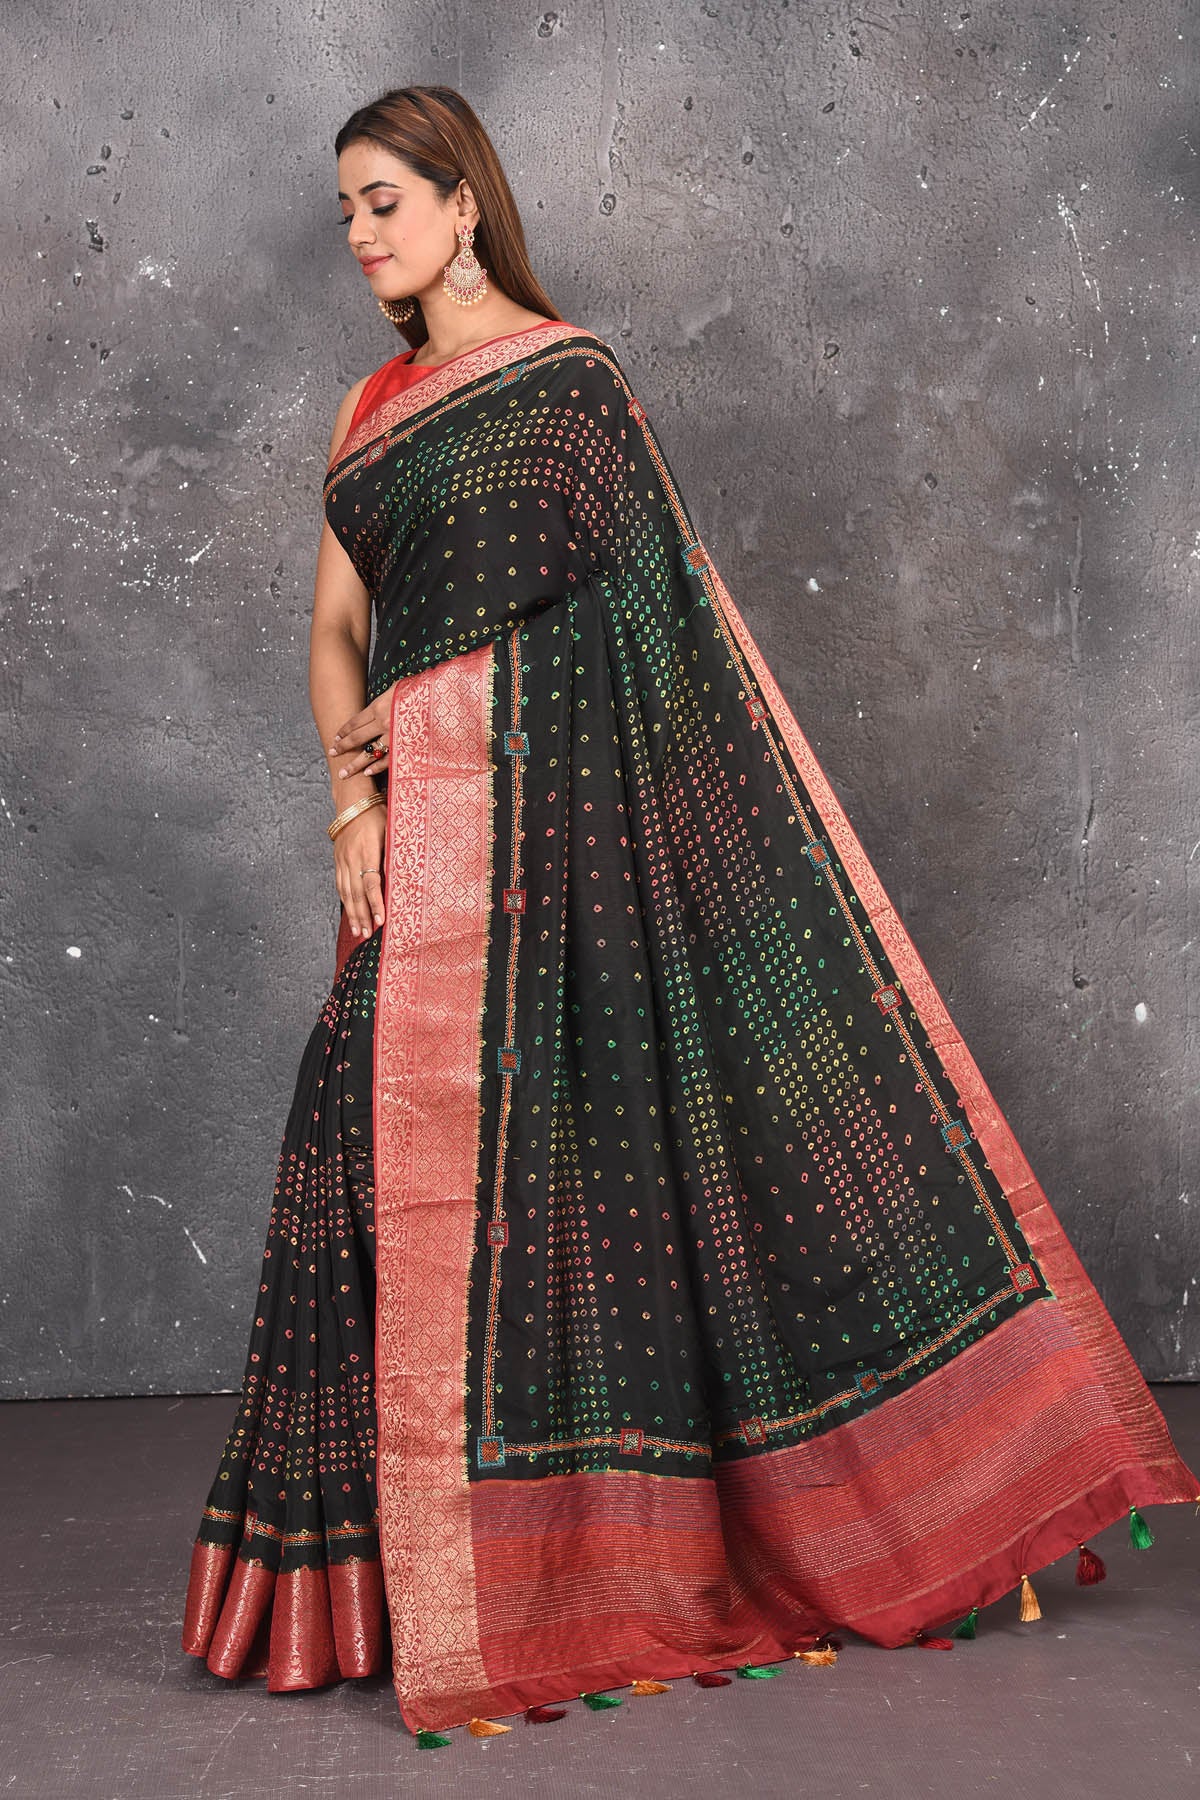 Buy this royal black banarasi pure muga silk saree with red-golden zari work online in USA. An enchanting black with scintillating palla and border. This muga silk brings the charm and simplicity of this black saree with border and pallu with the delegate zari work on border. Shop this designer silk sari from Pure Elegance Indian fashion store in USA.-Side view with open pallu.